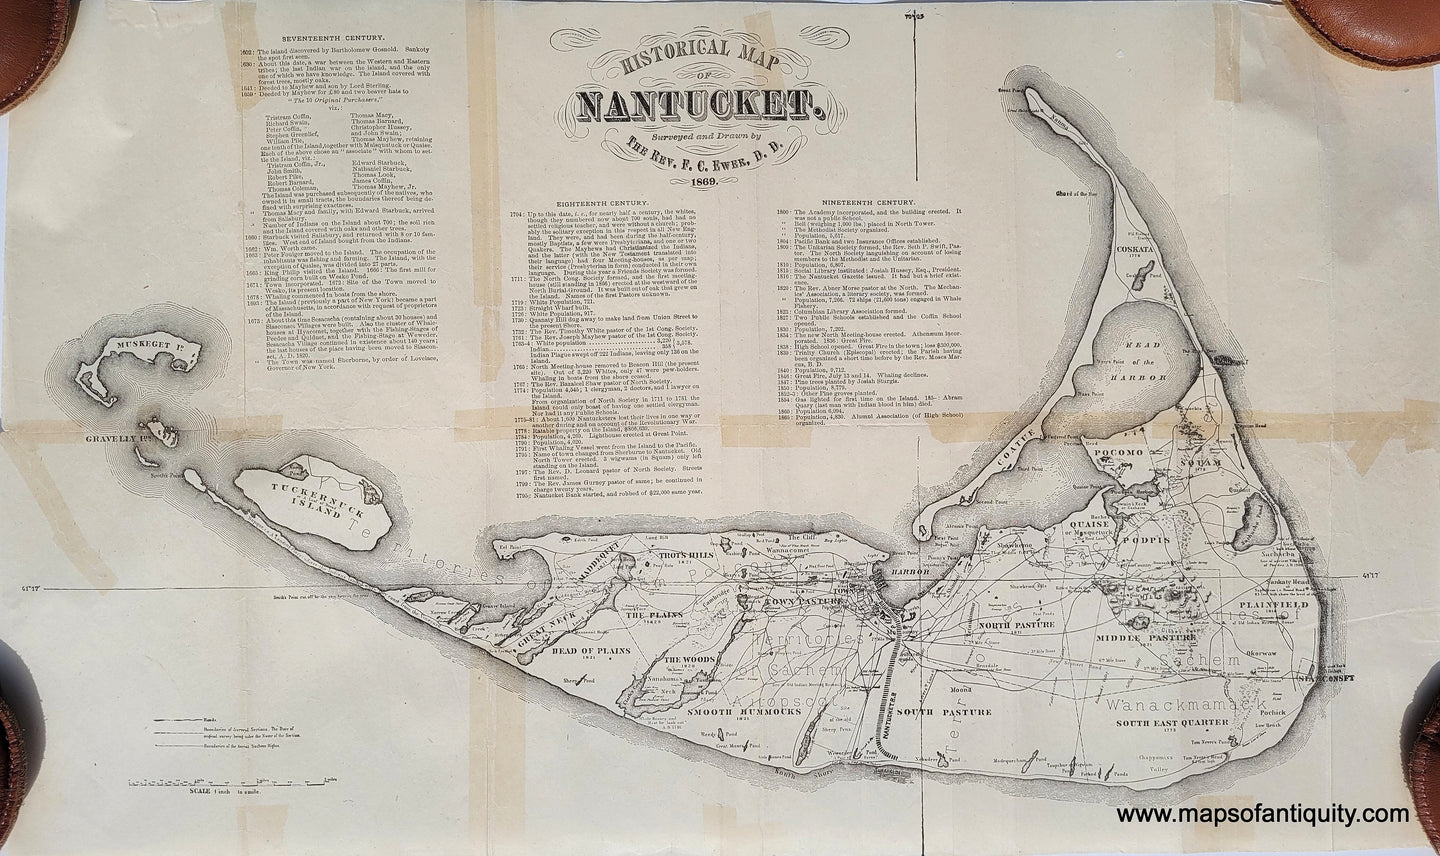 Genuine-Antique-Map-Historical-Map-of-Nantucket-1869-1889-Ewer-Godfrey-Maps-Of-Antiquity